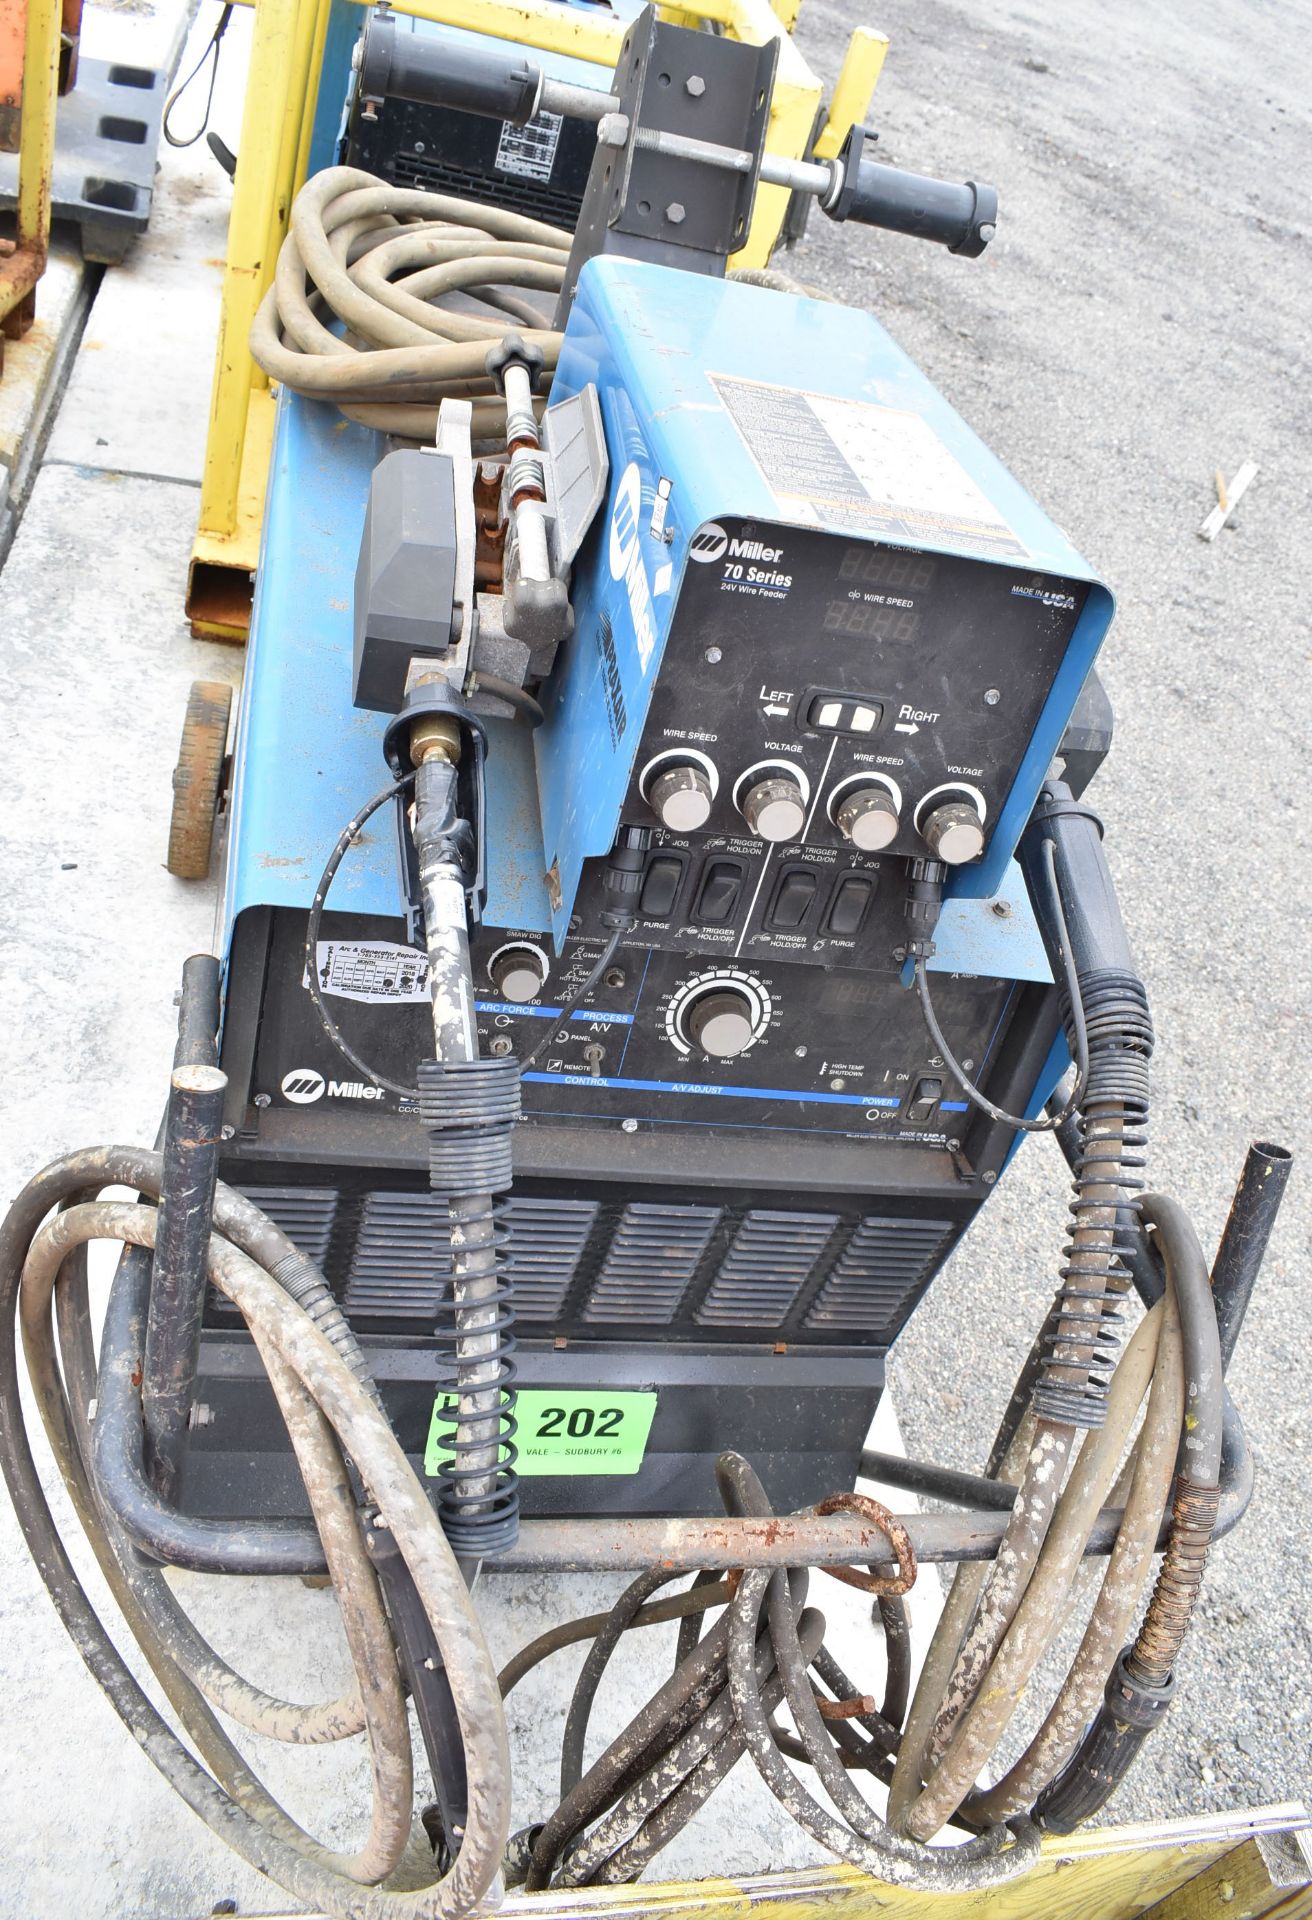 MILLER DIMENSION 652 DIGITAL MIG WELDER WITH MILLER 70 SERIES TWIN REEL WIRE FEEDER WITH CABLES